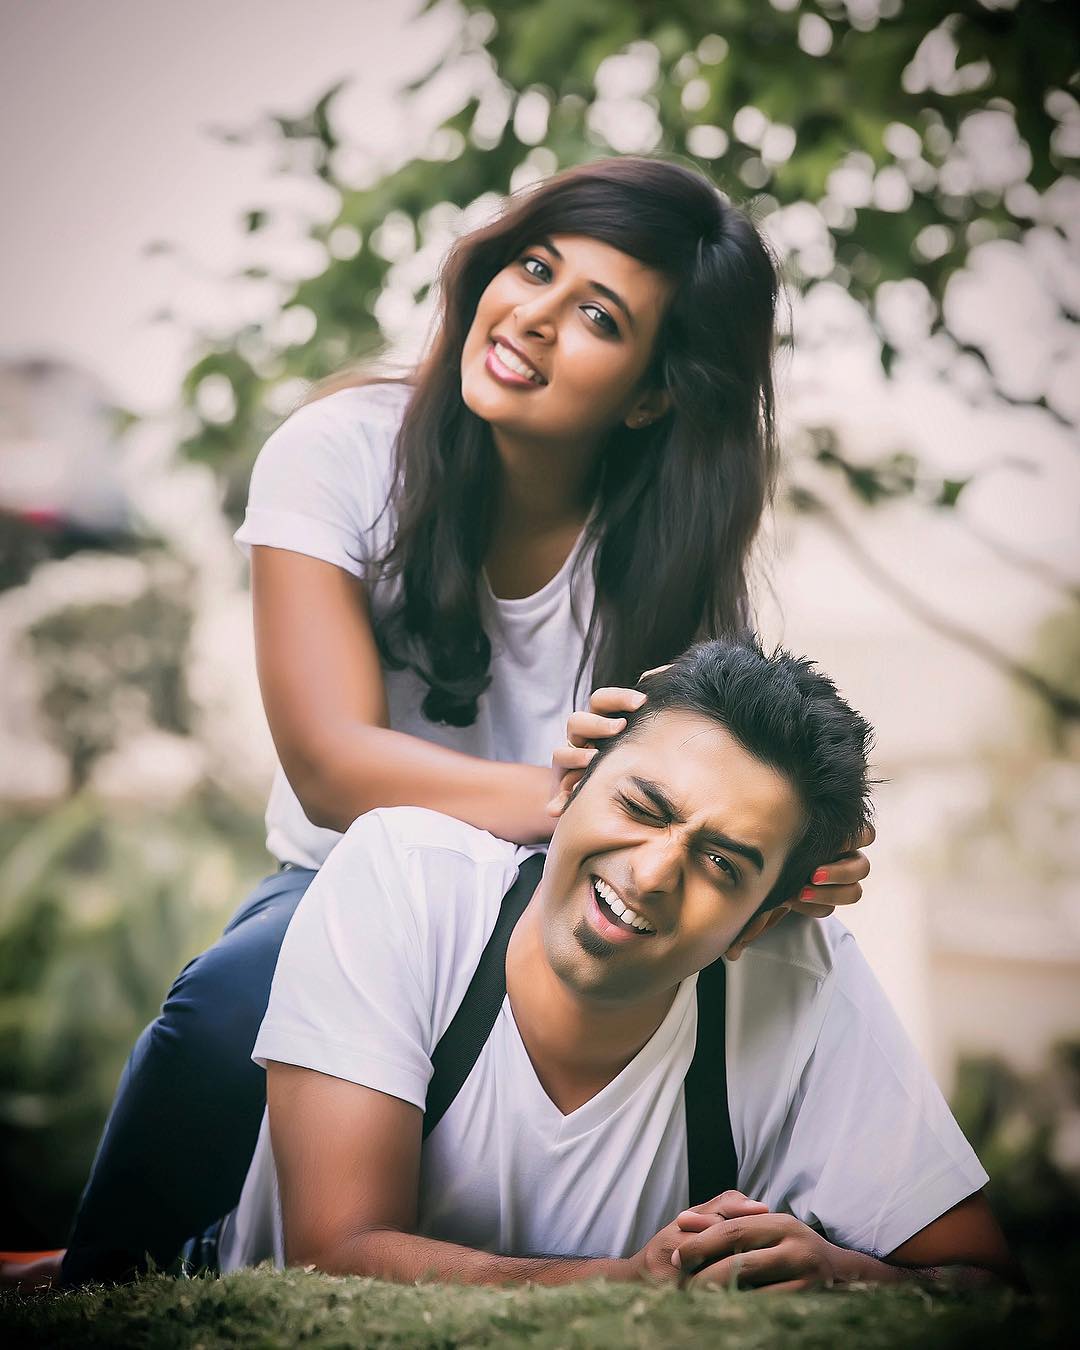 . The gym junkies: Pre-wedding Photoshoot for Indian Couples